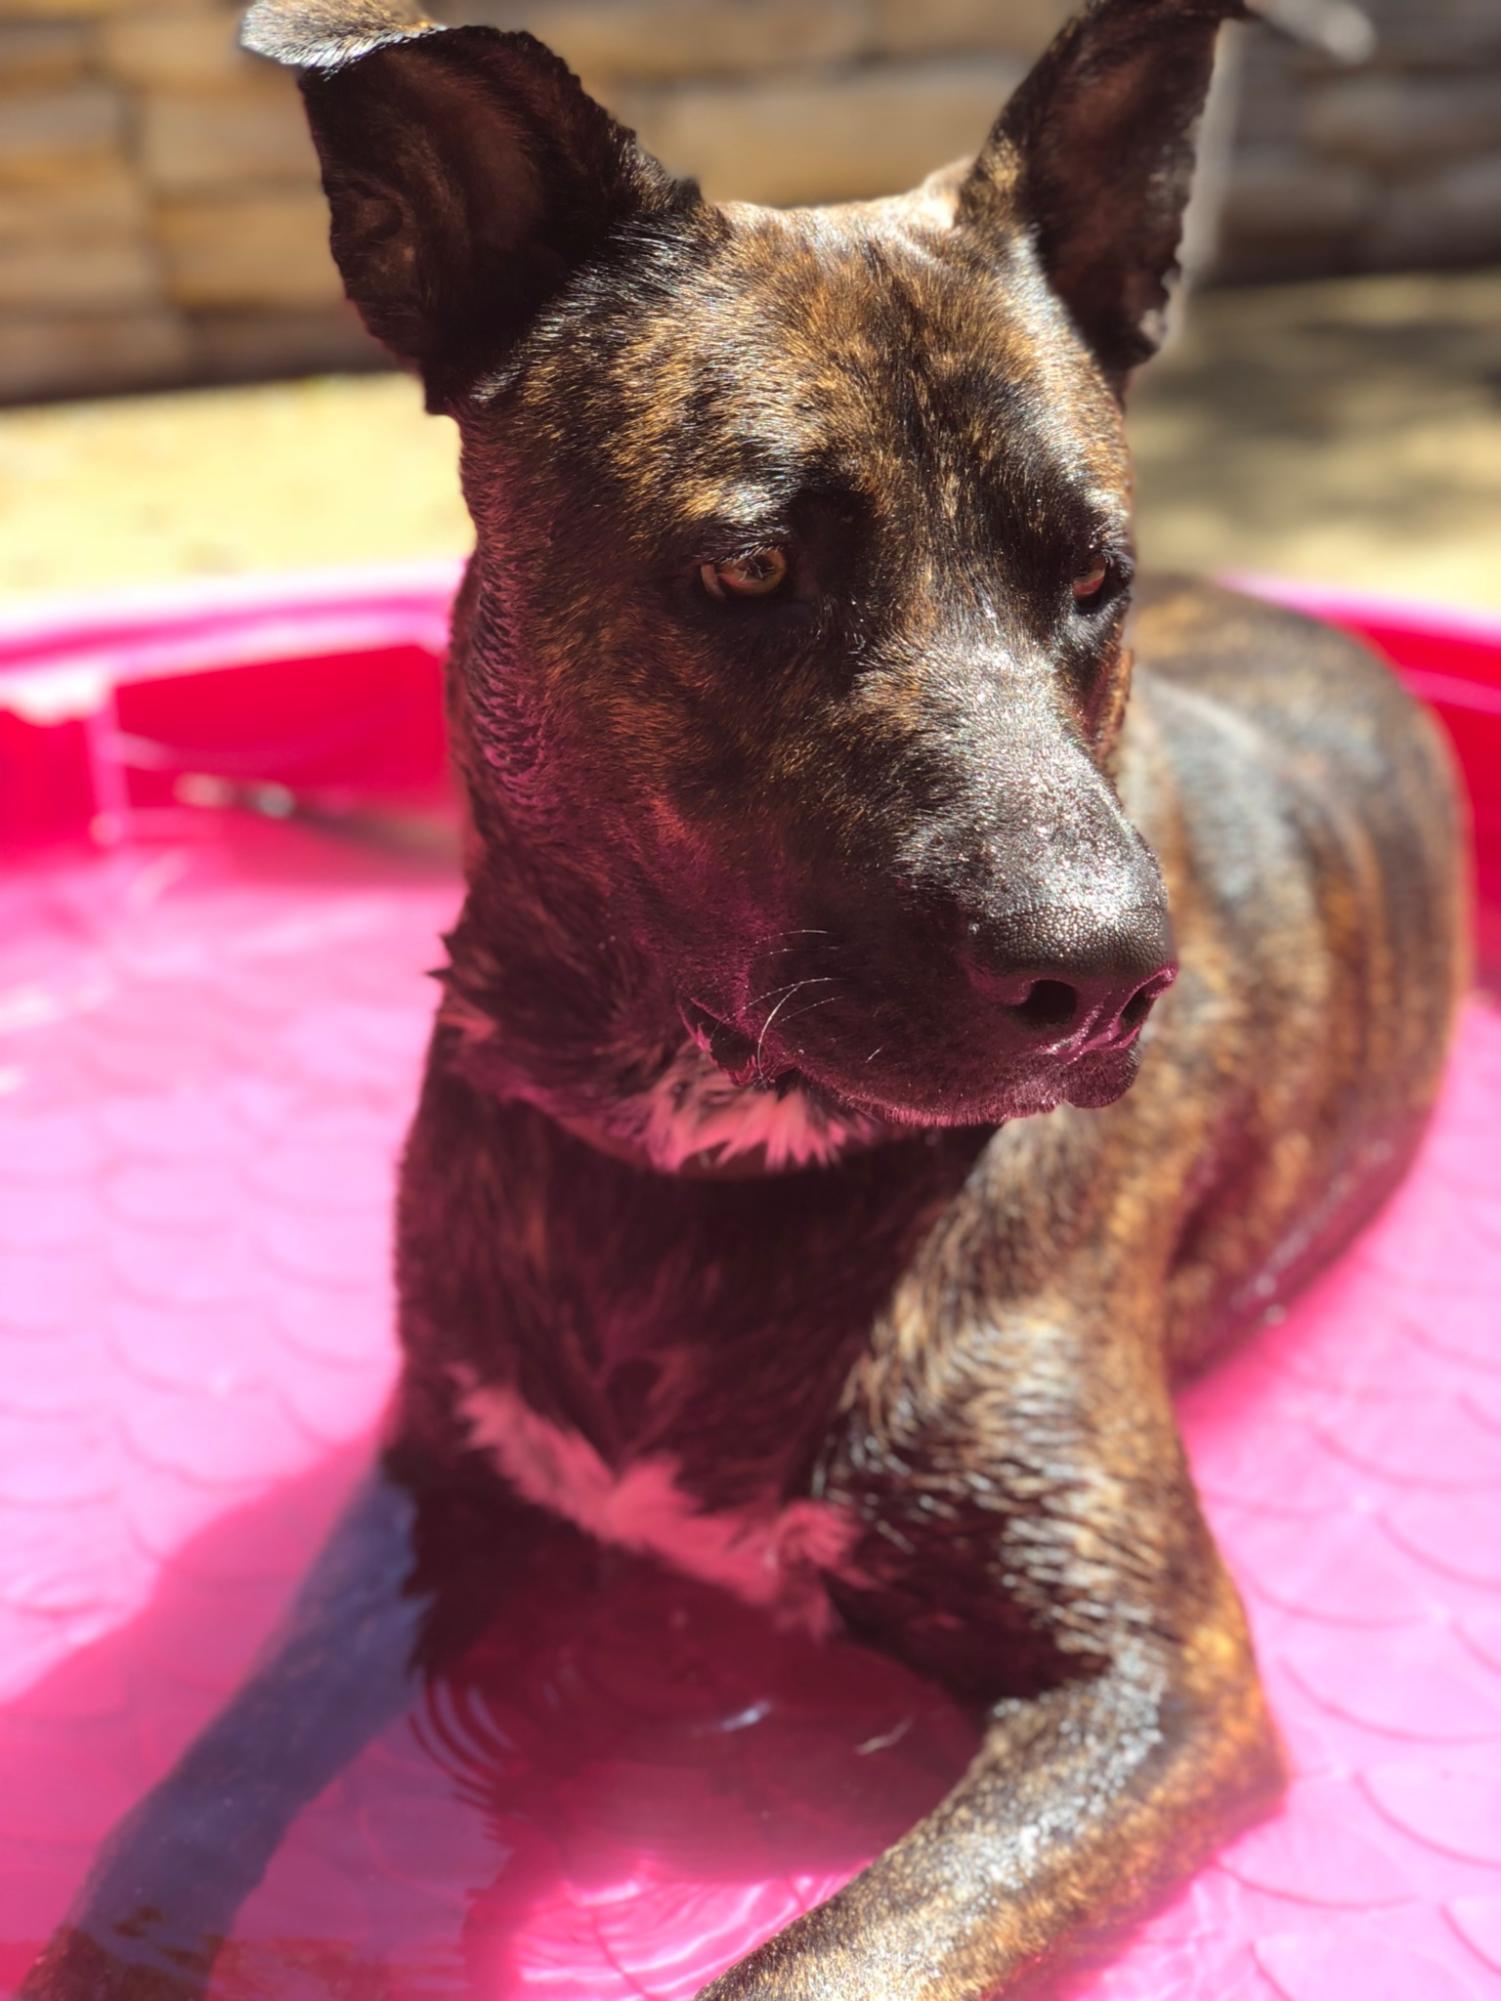 Jackson cools off in the pool on a hot day. 